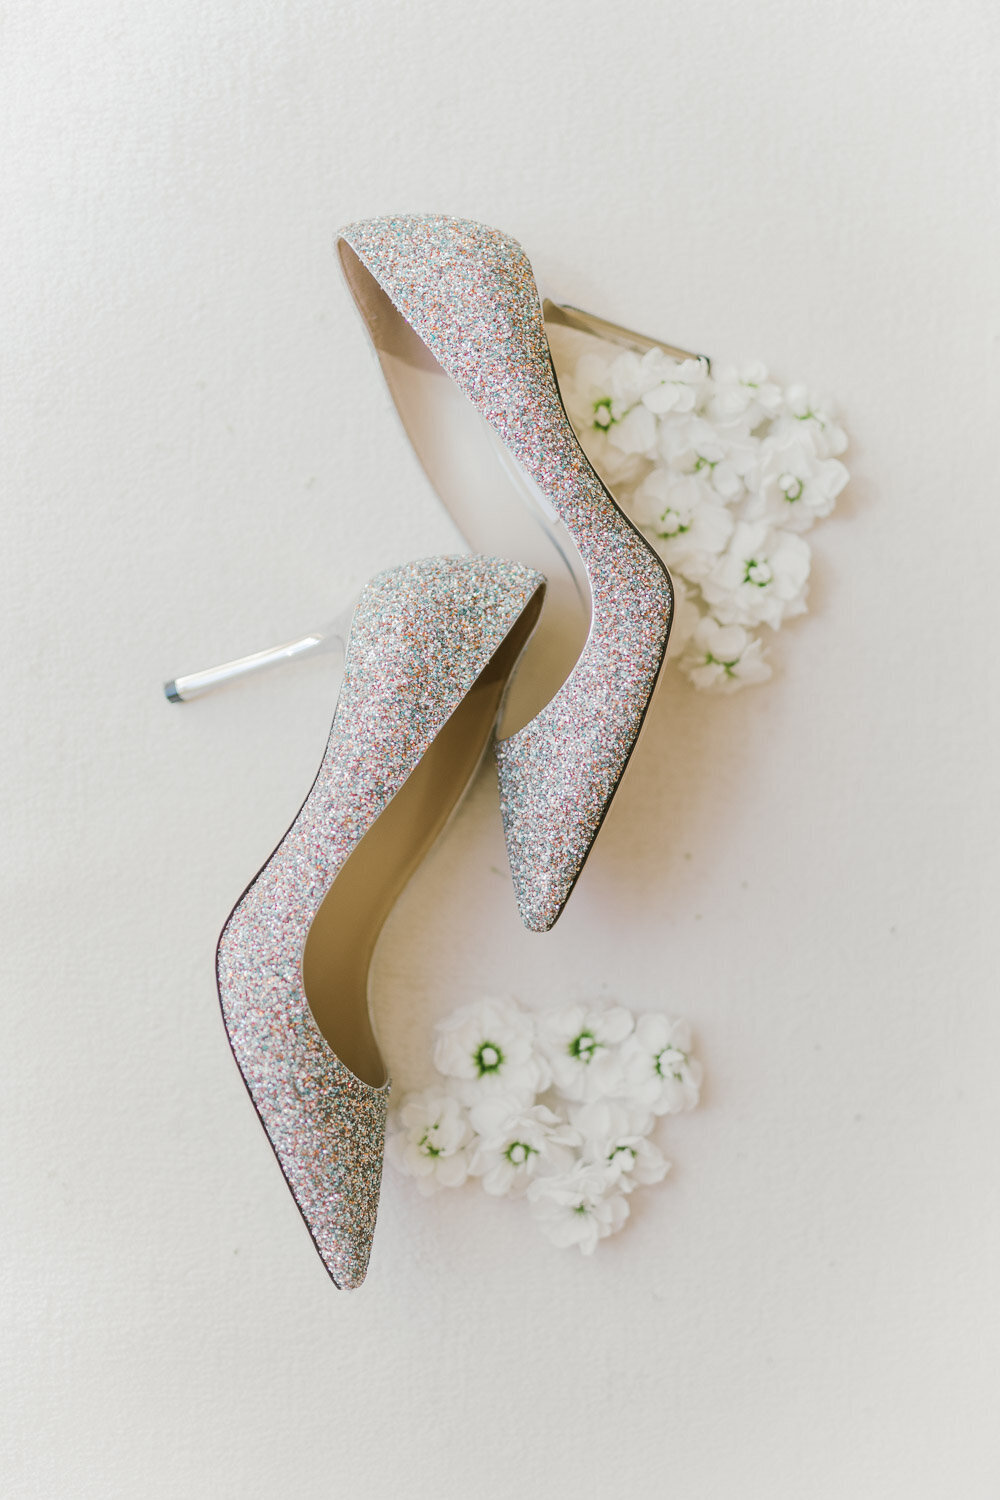 Jimmy Choo sparkling shoes